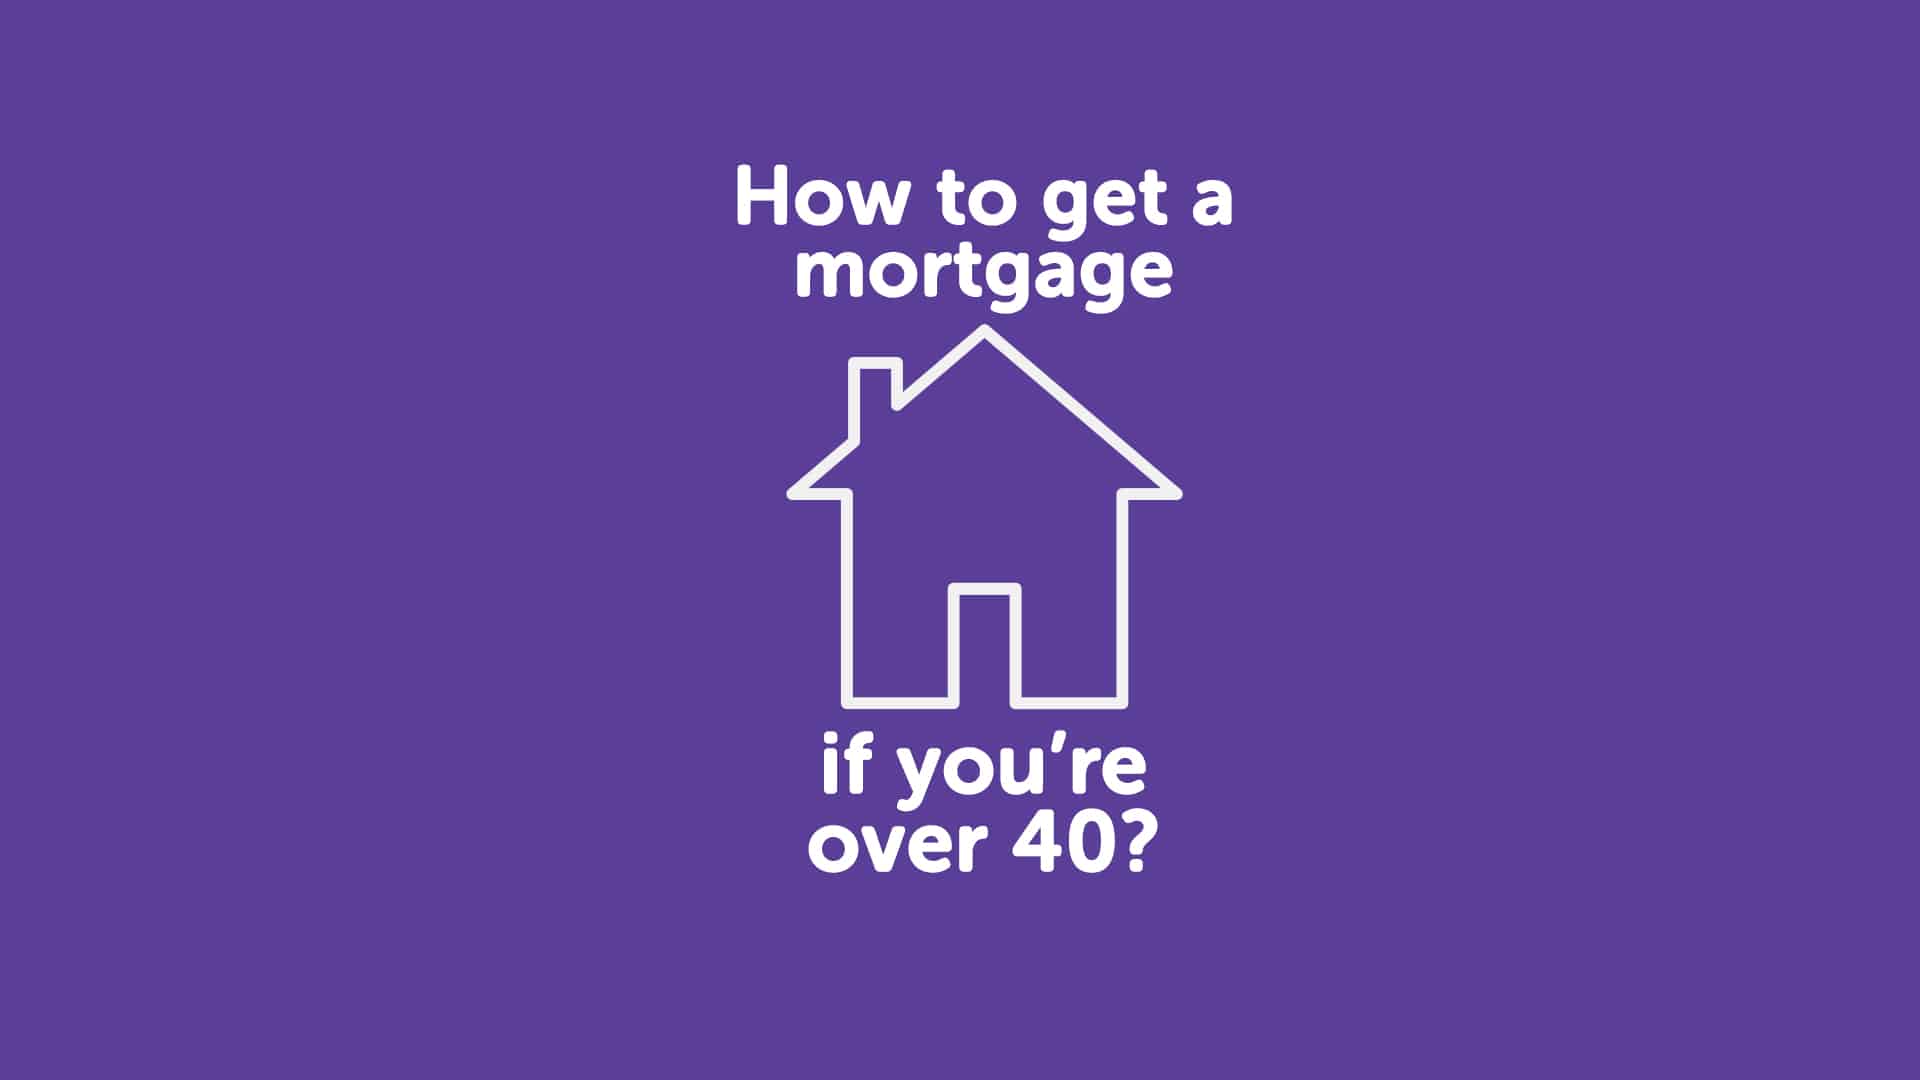 How to Get a Mortgage in Hull if You're Over 40